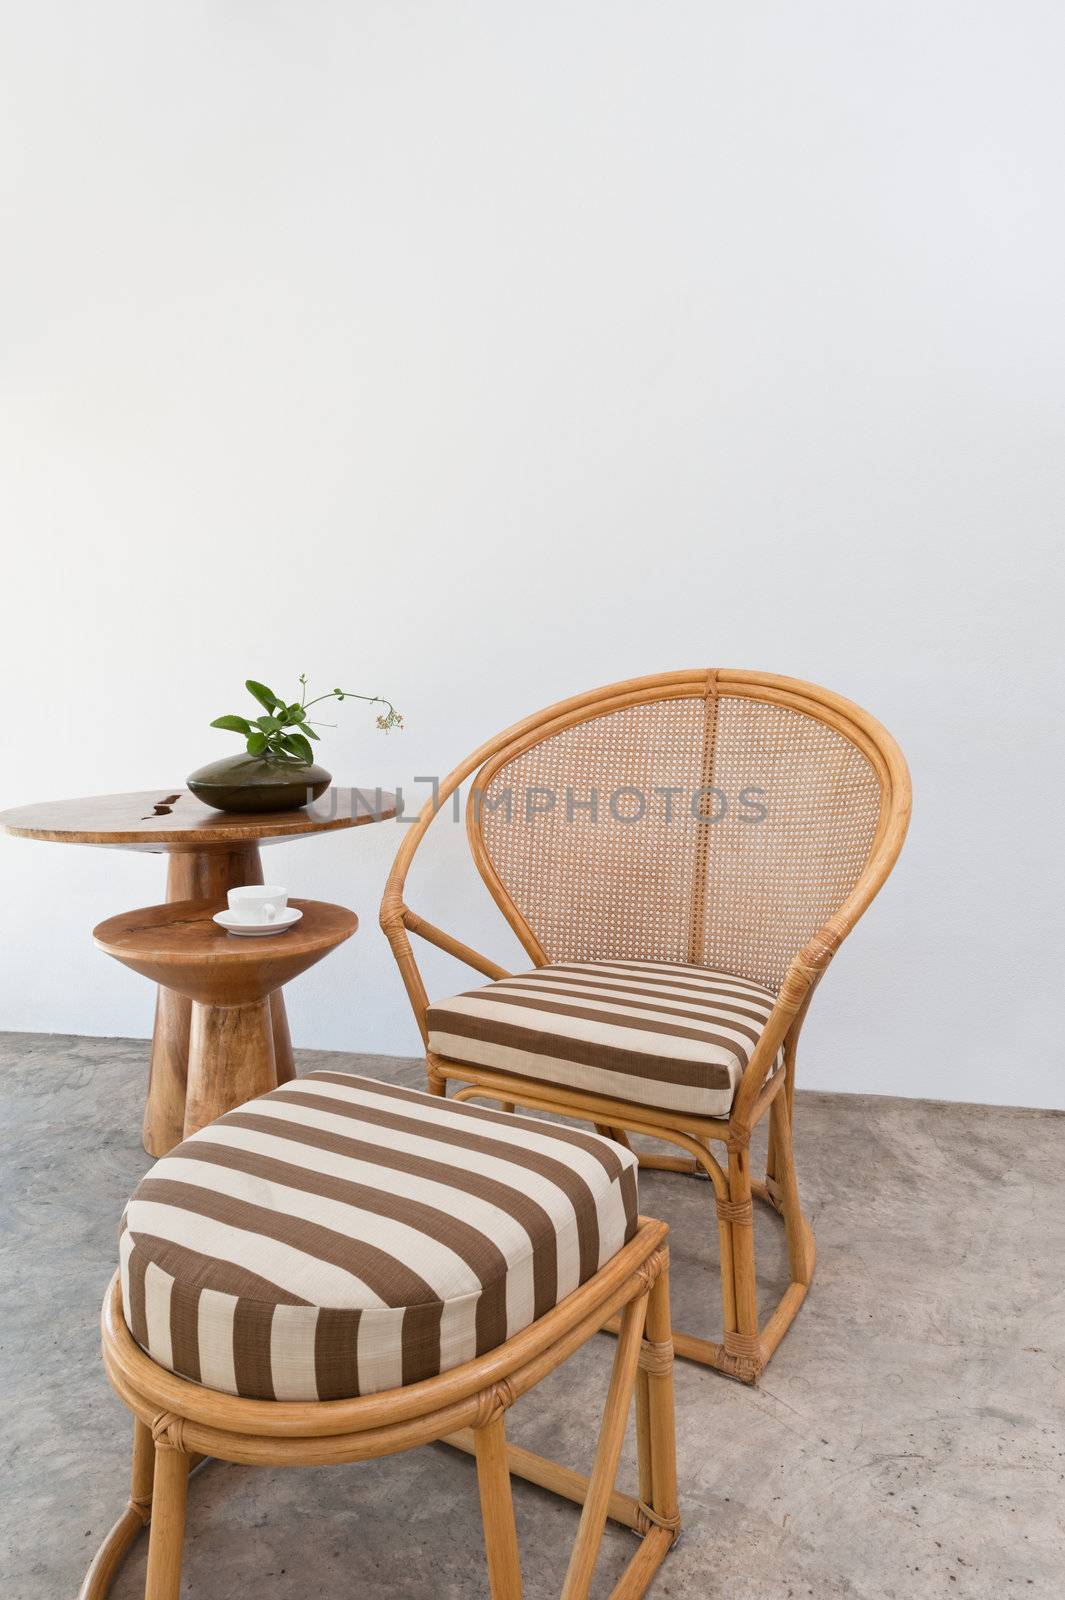 Beautiful bamboo rattan furniture in front of a white wall by 3523Studio